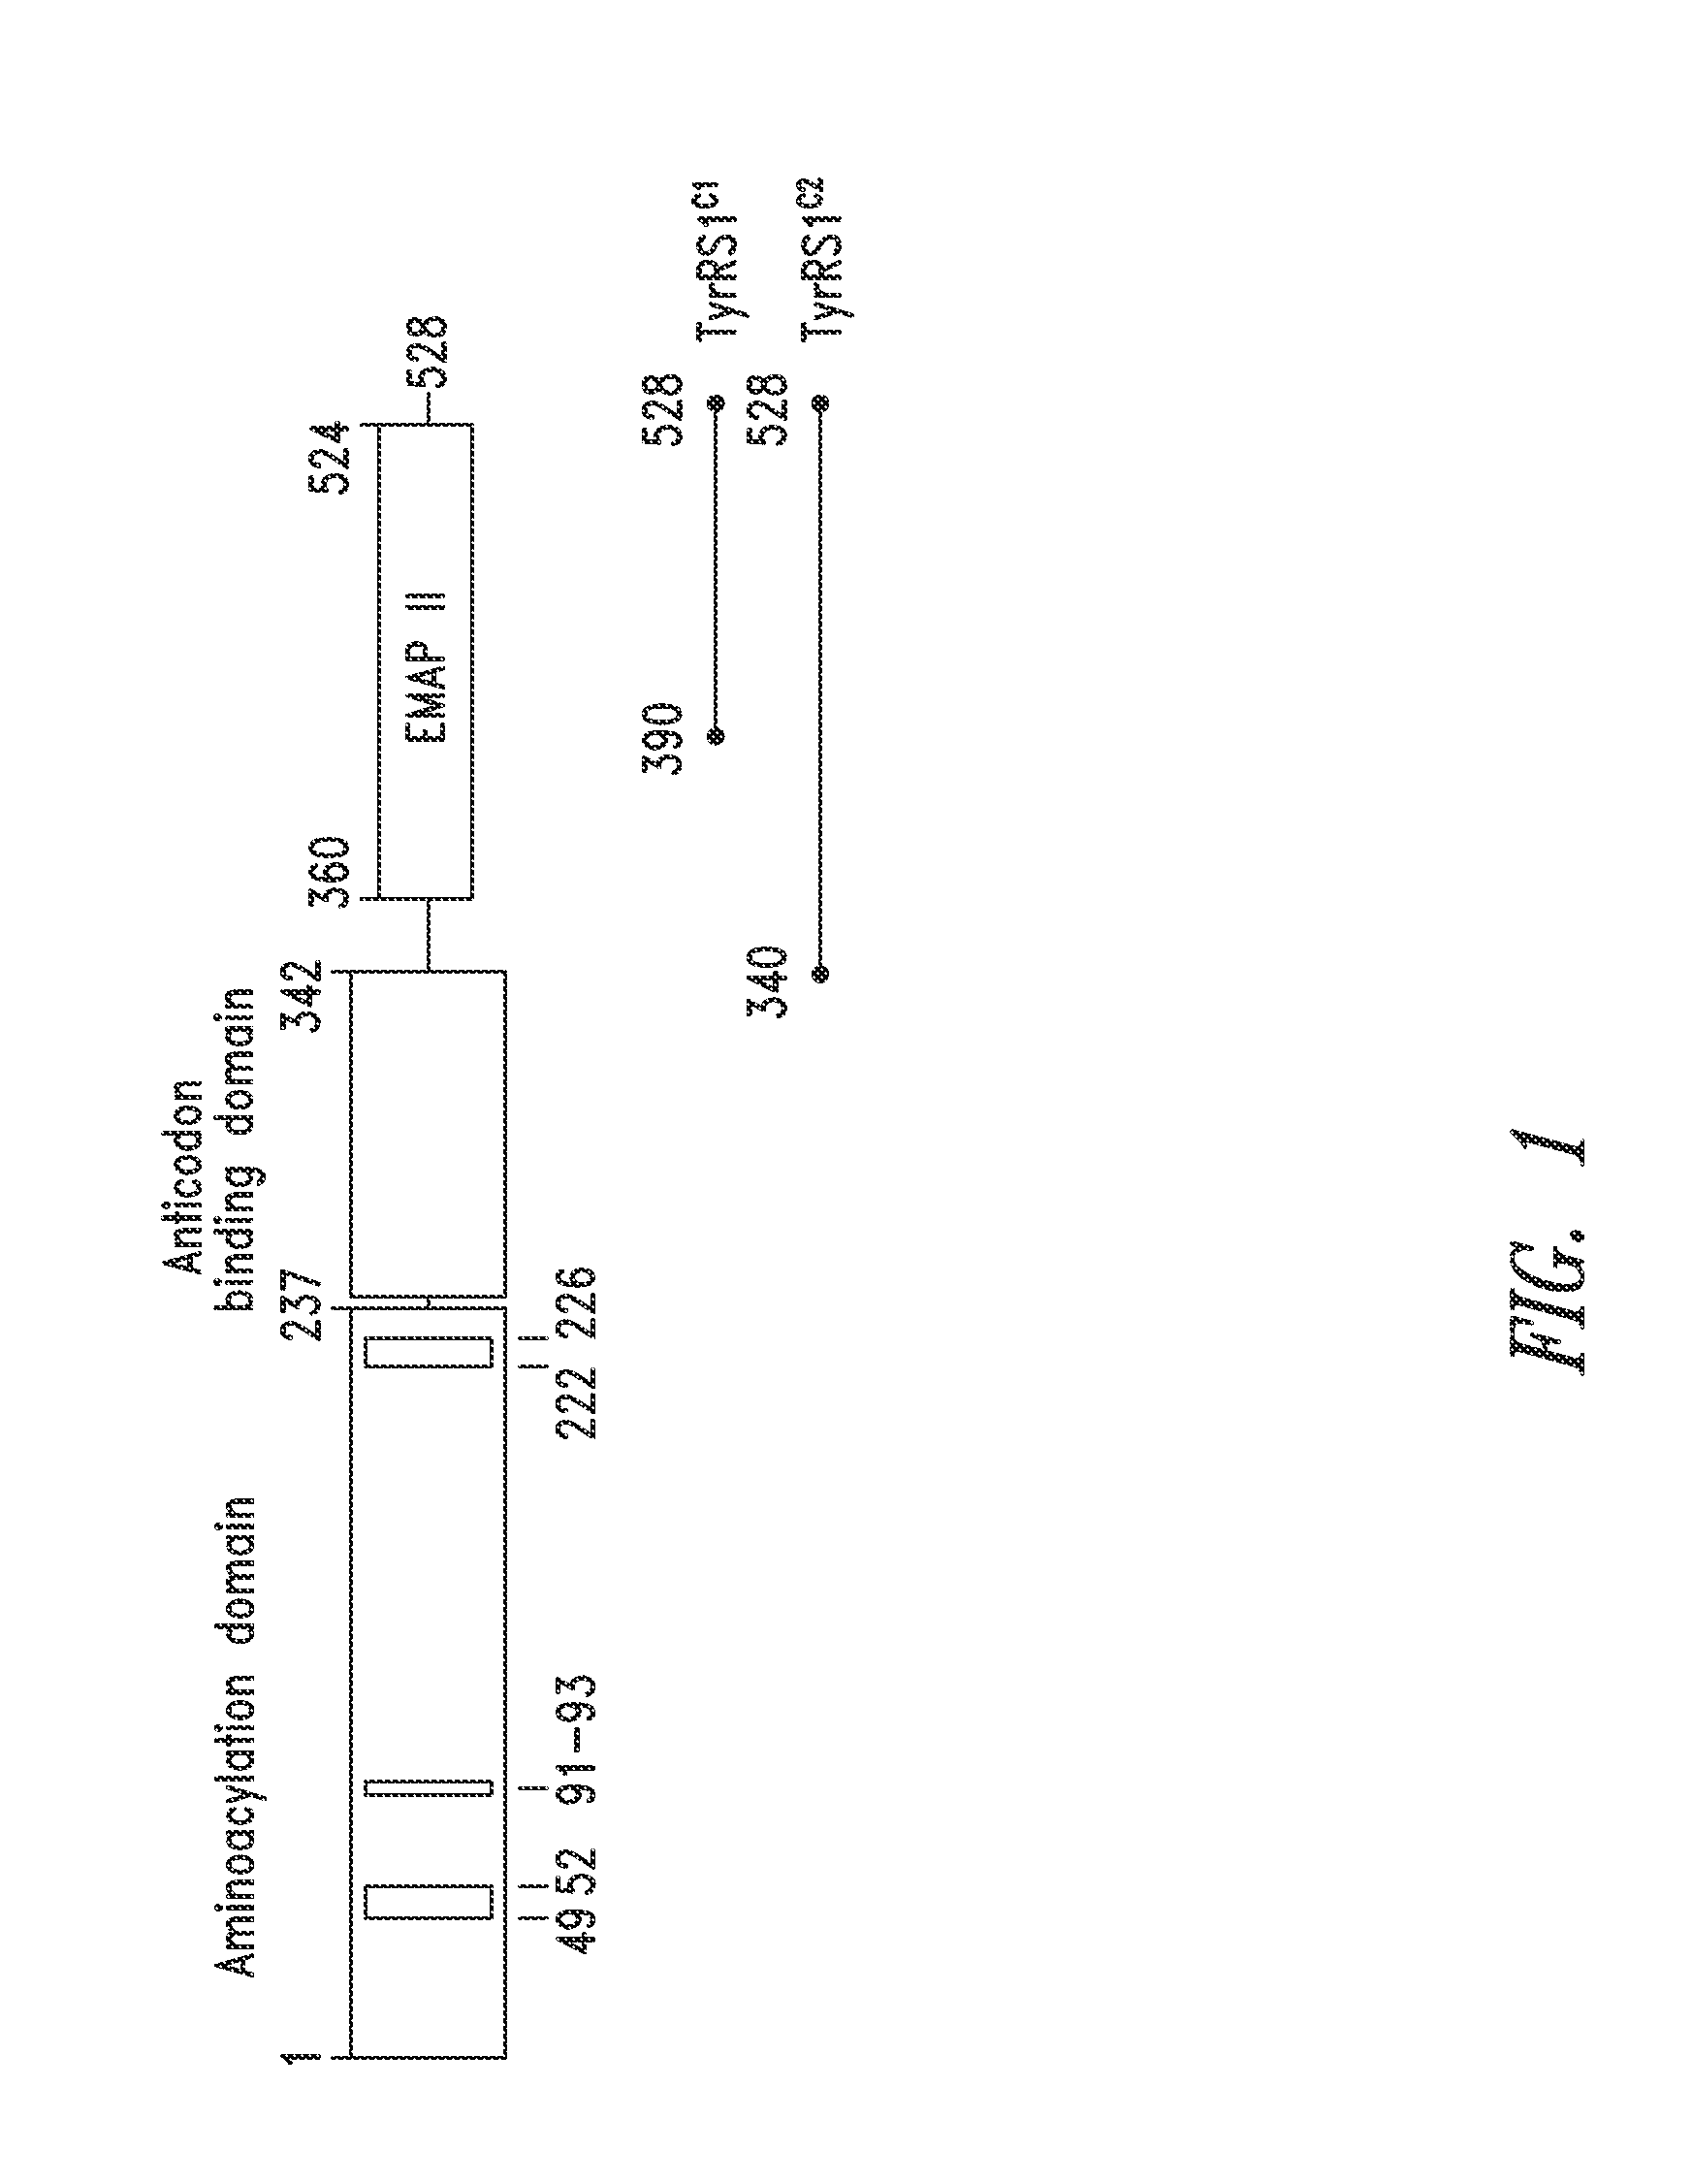 INNOVATIVE DISCOVERY OF THERAPEUTIC, DIAGNOSTIC, AND ANTIBODY COMPOSITIONS RELATED TO PROTEIN FRAGMENTS OF TYROSYL-tRNA SYNTHETASES